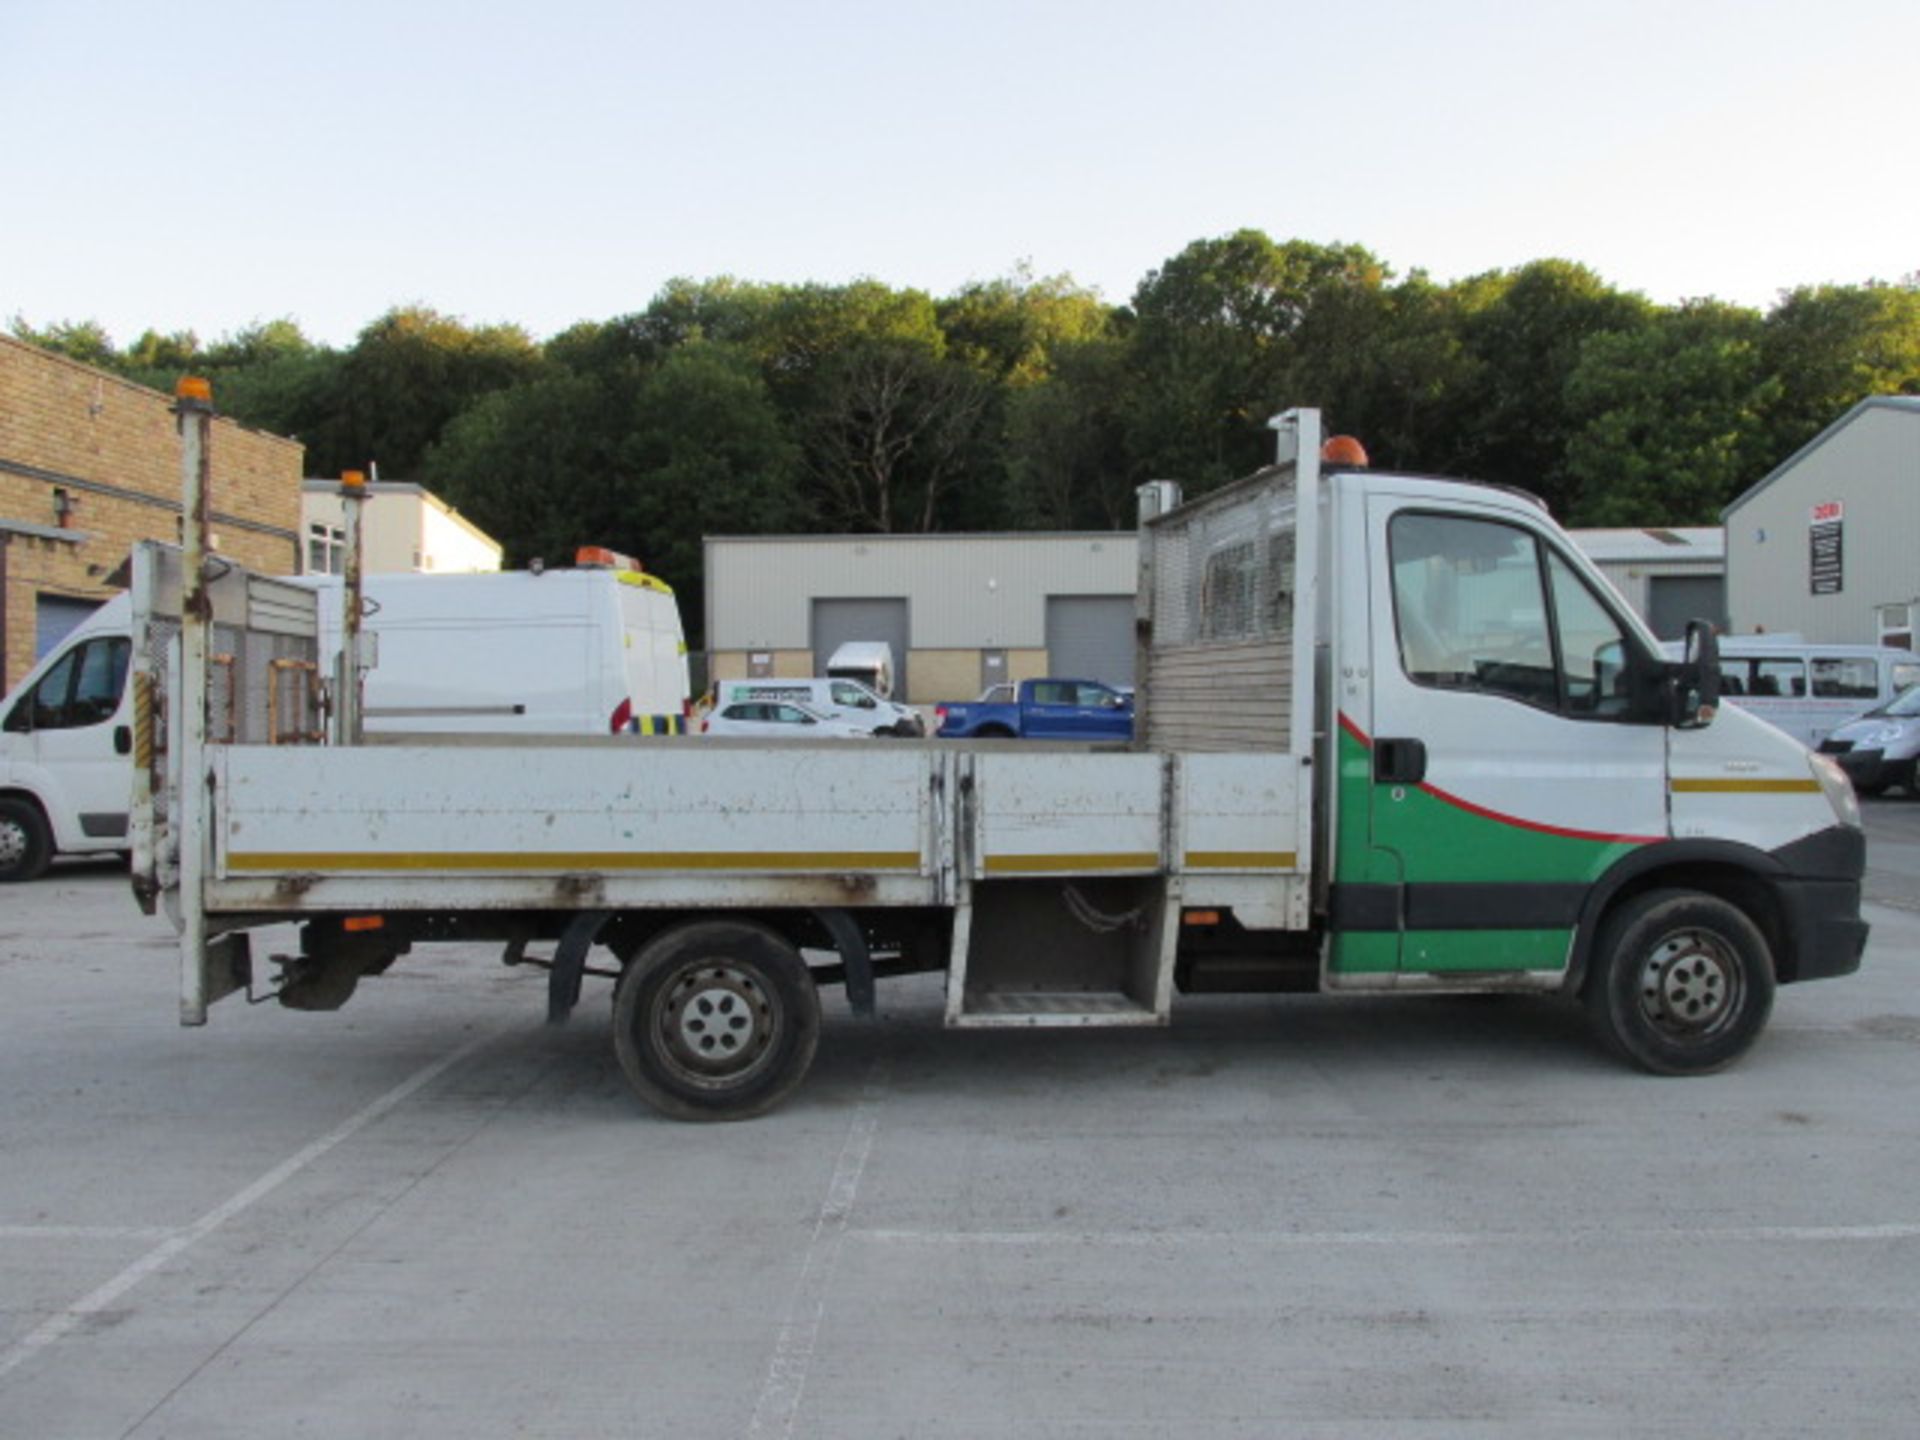 2013 Iveco Daily 35S13 Diesel Chassis Cab 3450 Wheelbase DropSide Pickup Truck with Tail Lift - Image 8 of 12